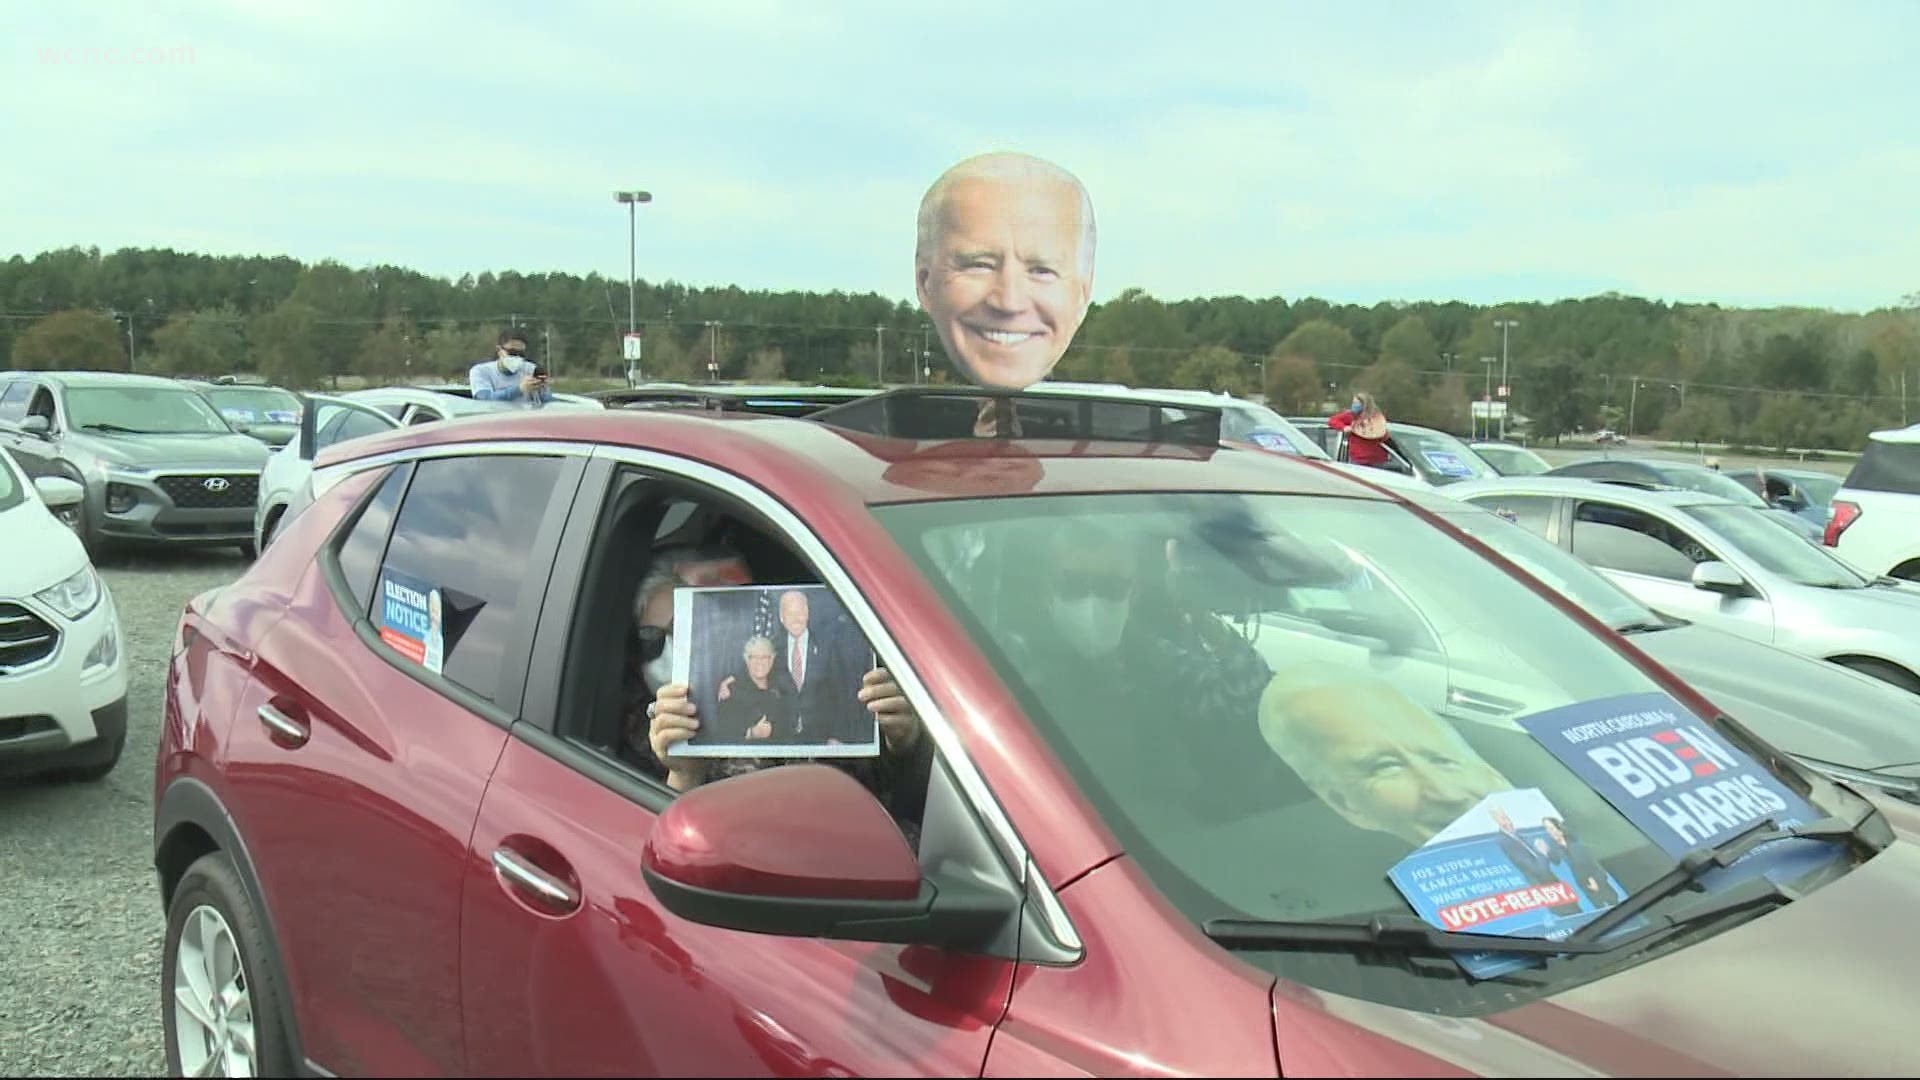 Former Second Lady Jill Biden and comedian Amy Schumer visited Charlotte Saturday, headlining a drive-in rally for Joe Biden.